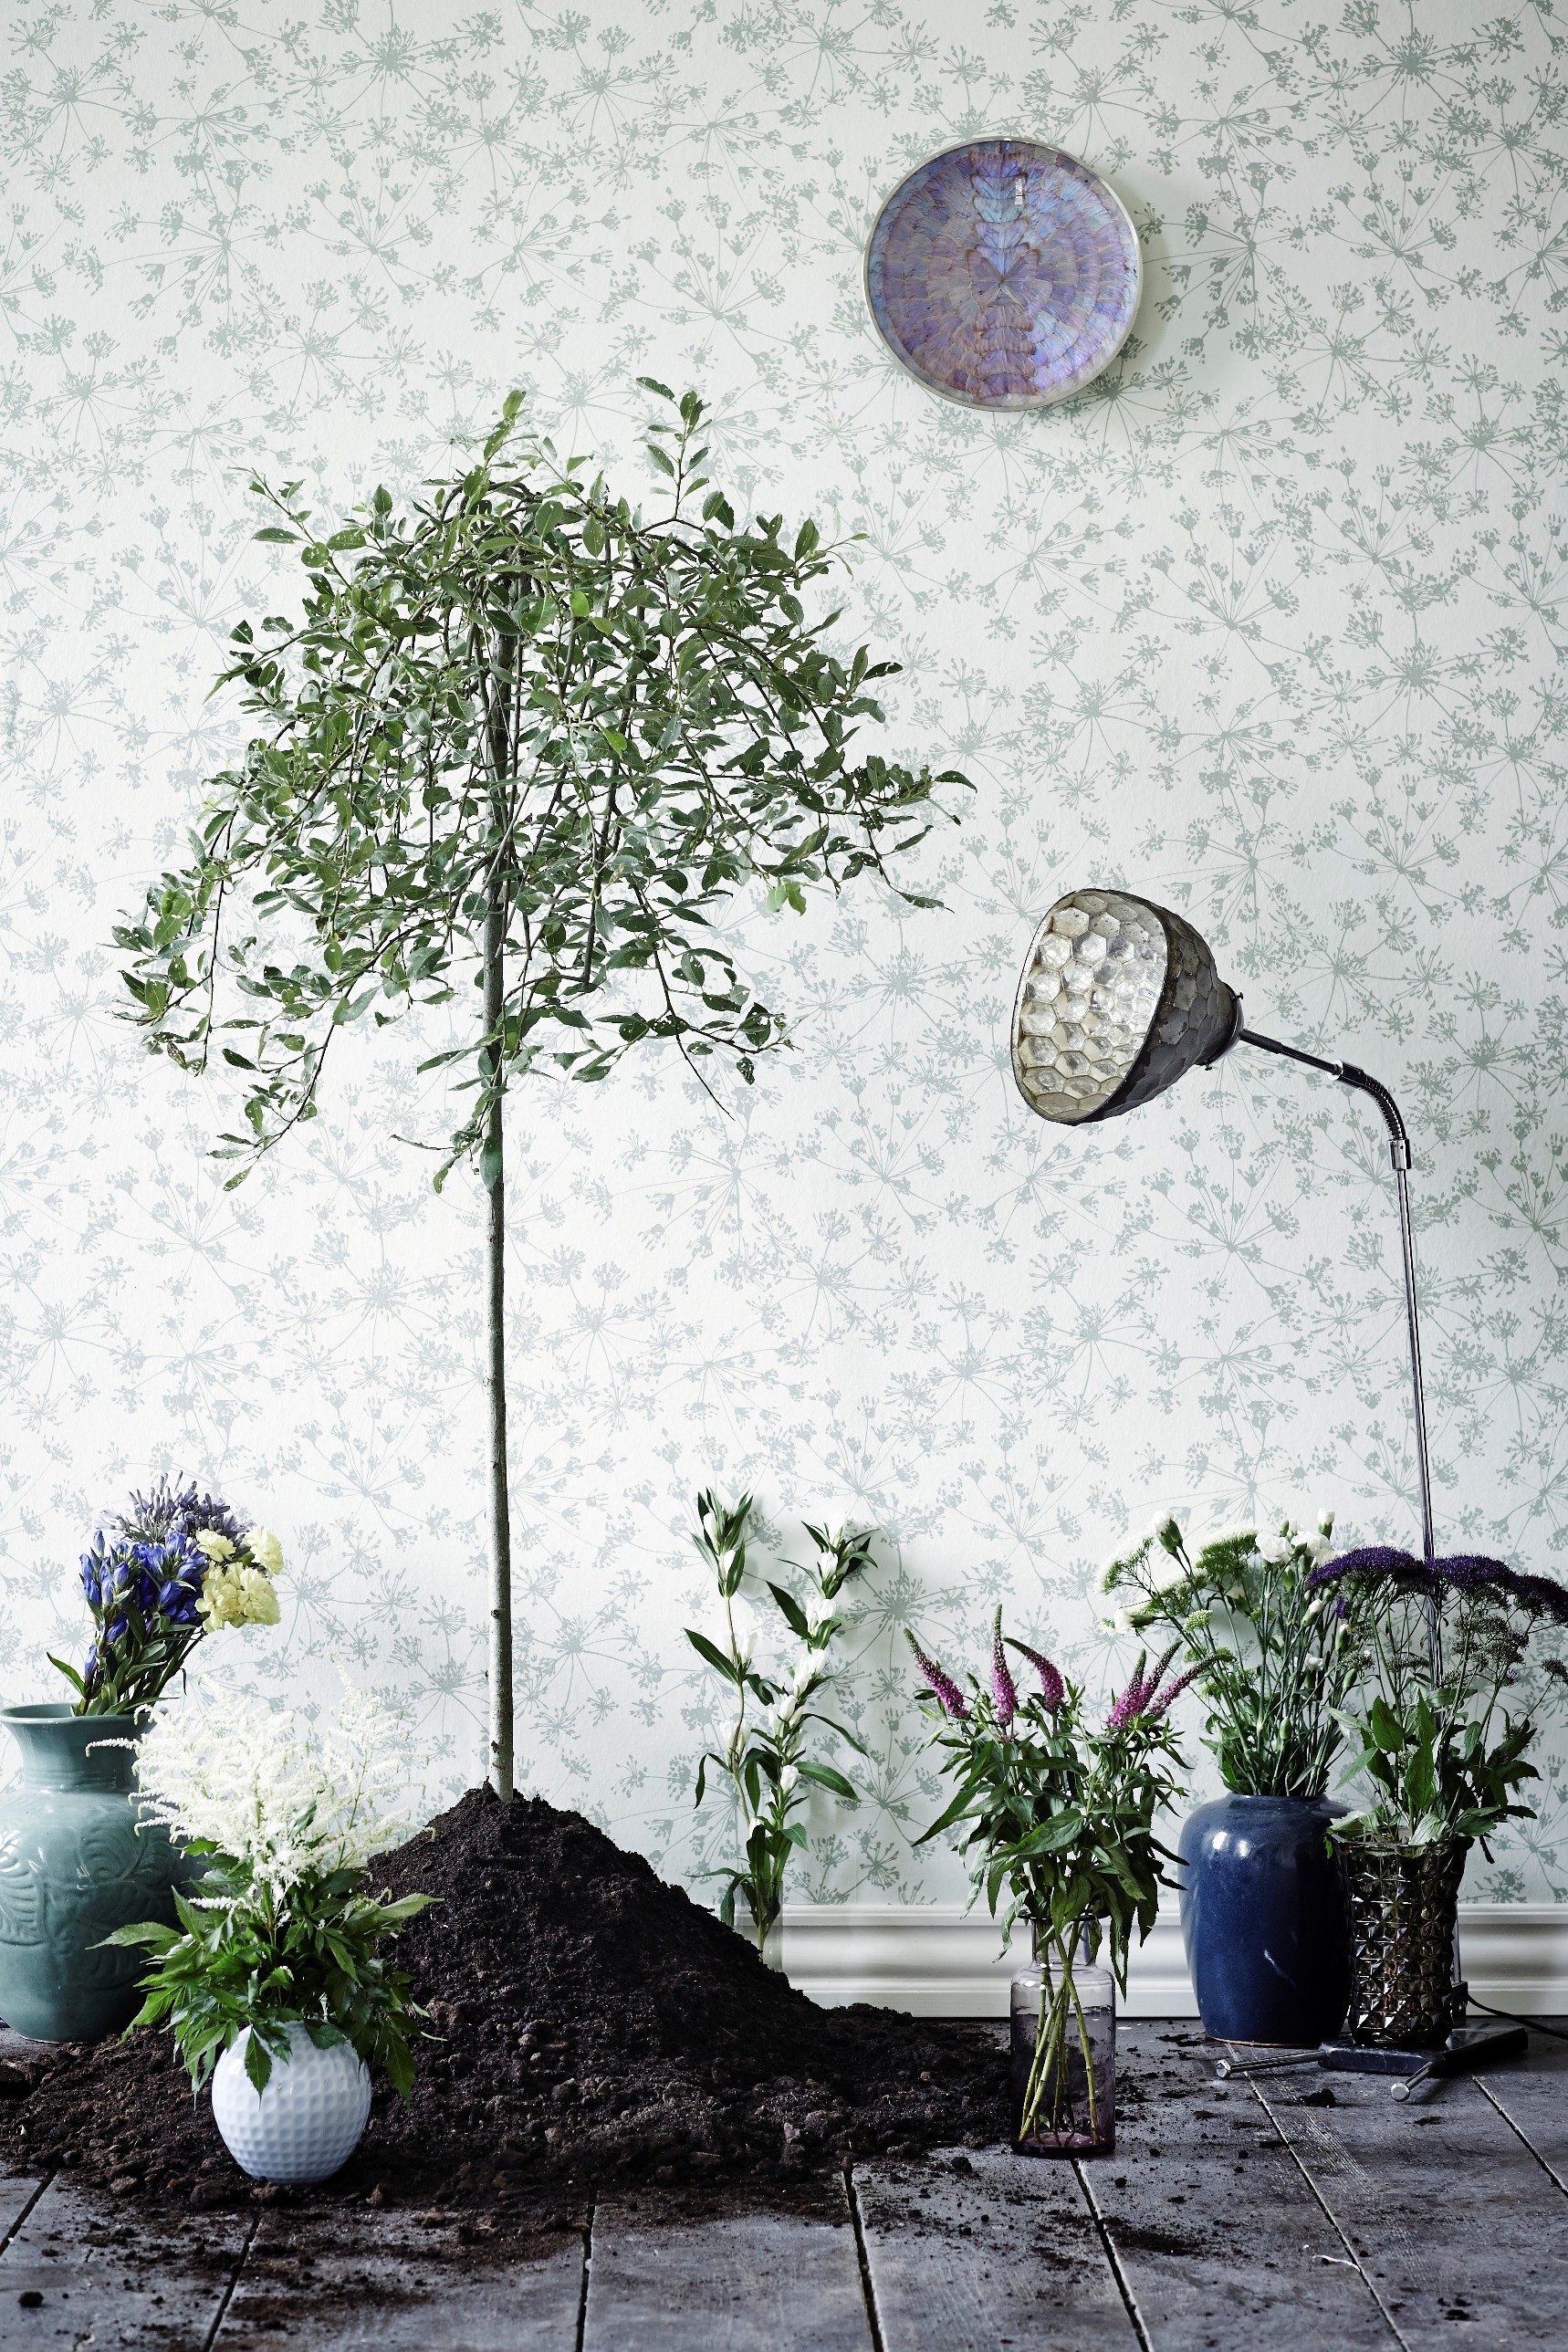 Here is "parsley" from the wallpaper Collection Botanic Garden from Flügger. Designed by Helene Blanche.